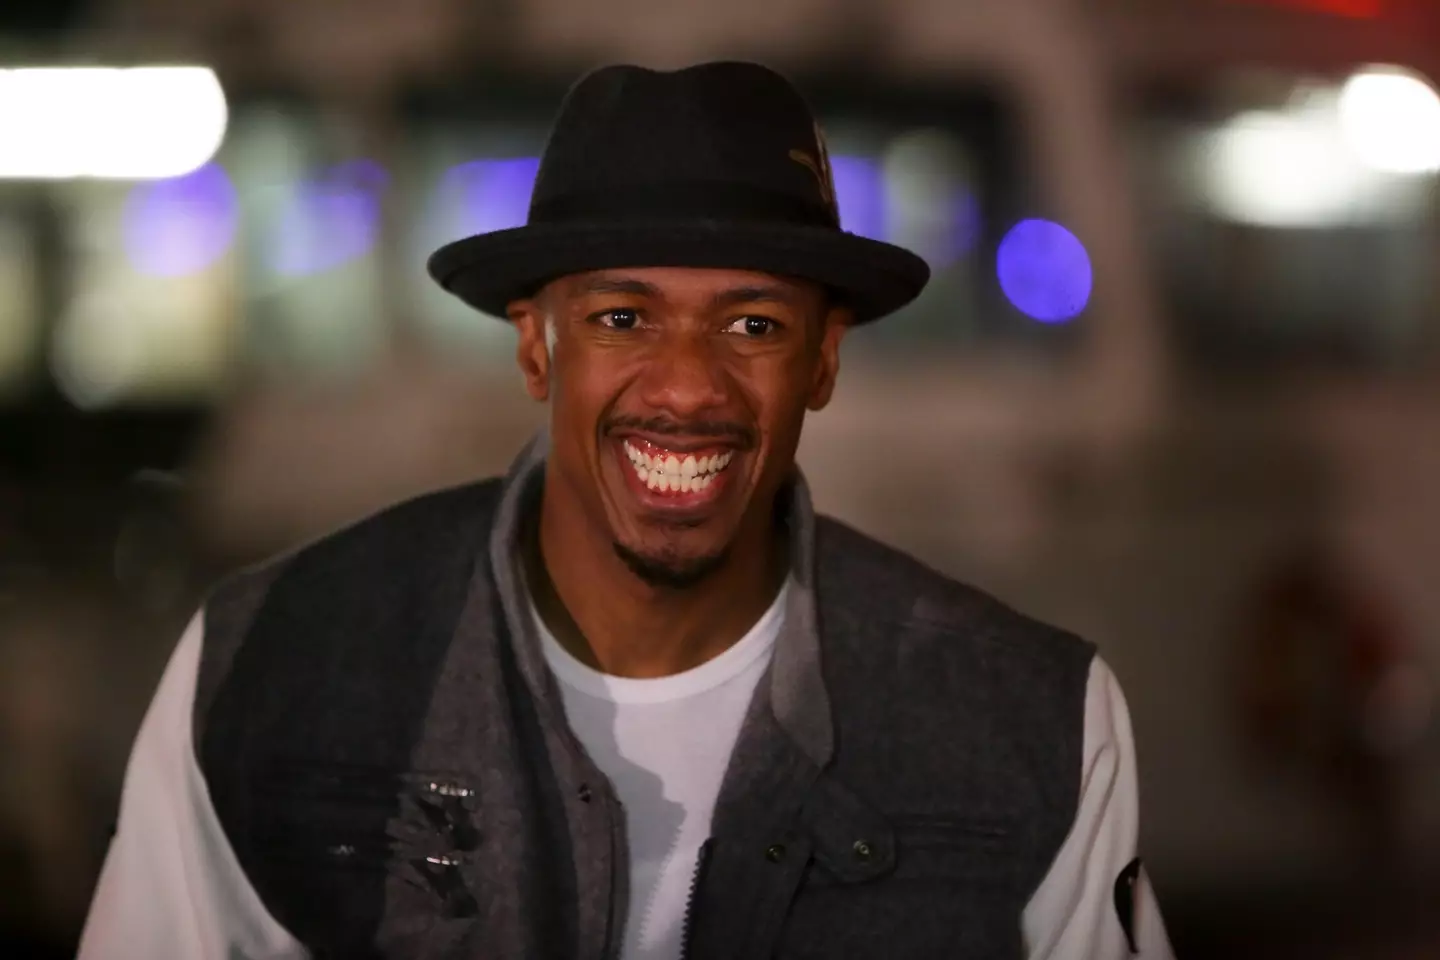 Nick Cannon's 12th child is on the way, but his 11th hasn't even been born yet.